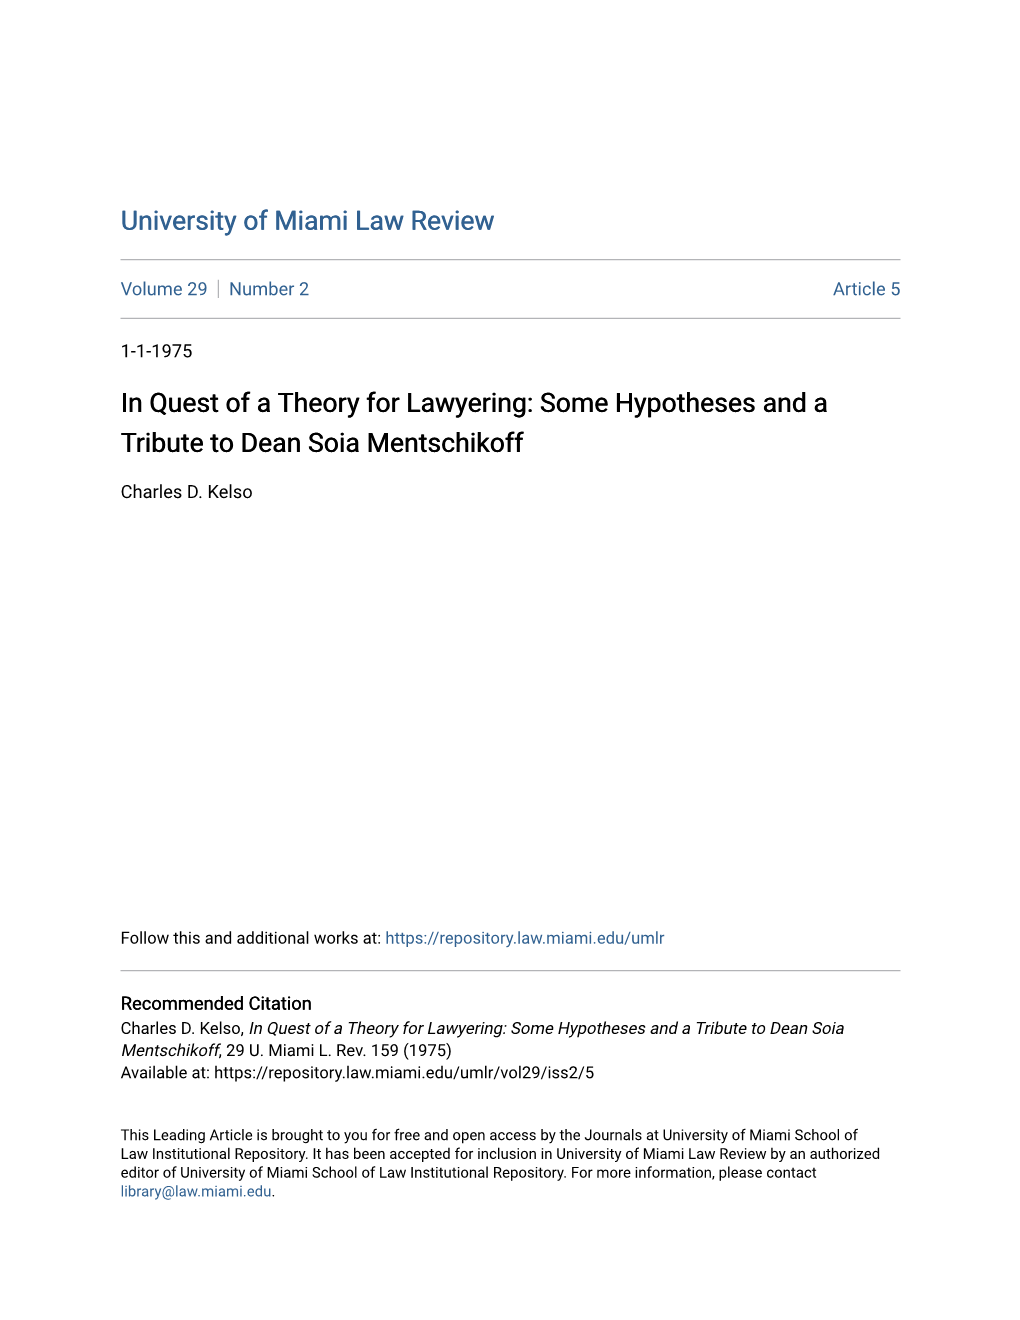 In Quest of a Theory for Lawyering: Some Hypotheses and a Tribute to Dean Soia Mentschikoff